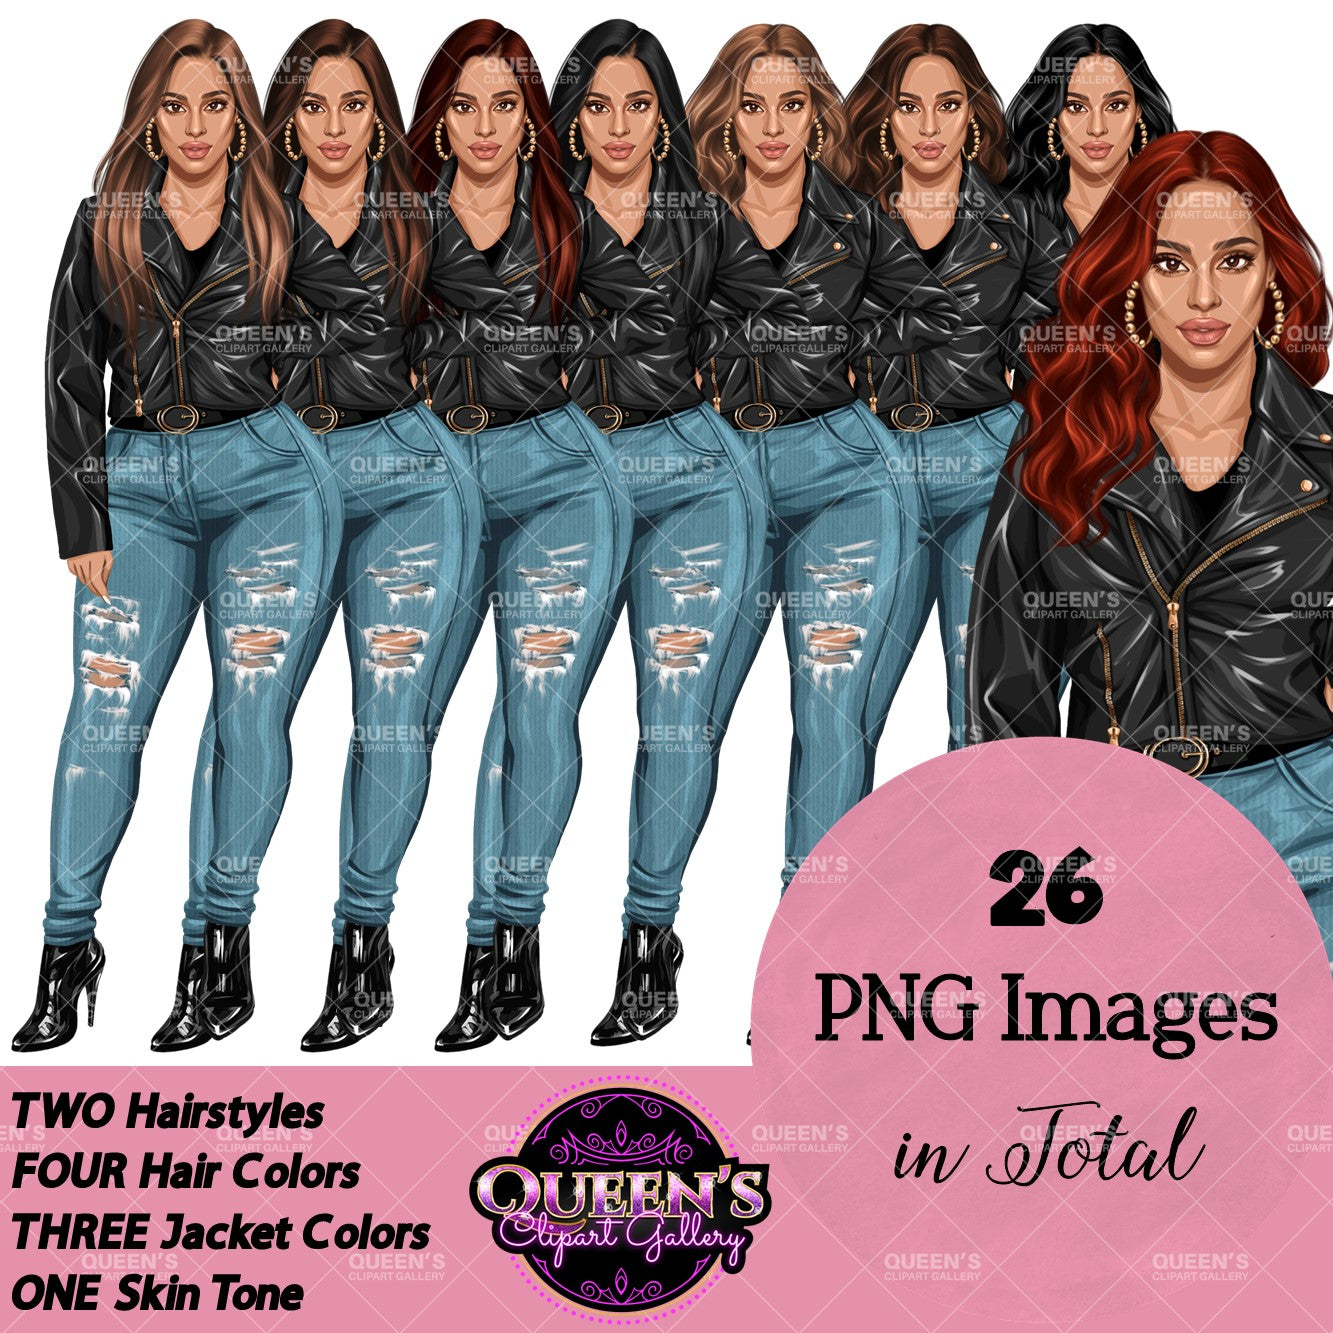 Denim girl clipart, Fashion girl clipart, Jeans girl clipart, Fashion illustration, Curvy girl clipart, Denim clipart, Woman in leather jacket